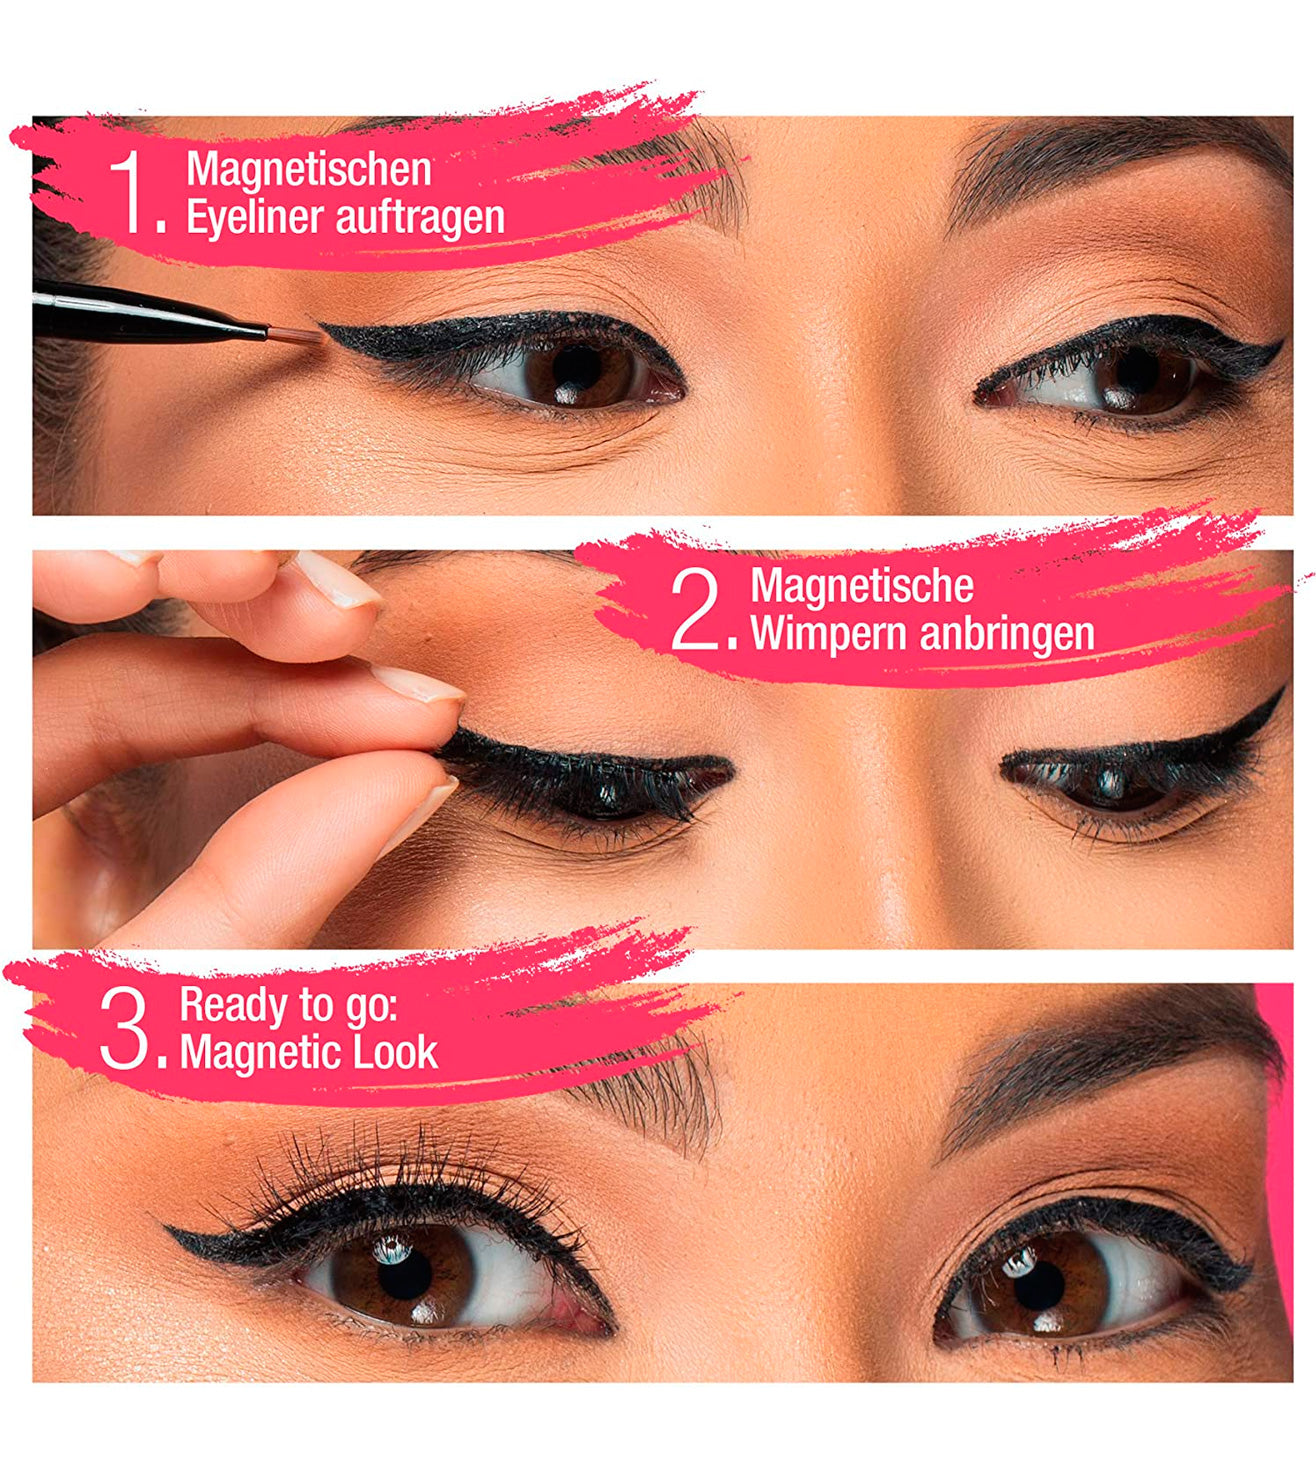 MAGNETIC LINER AND LASH WISPIES - 36850